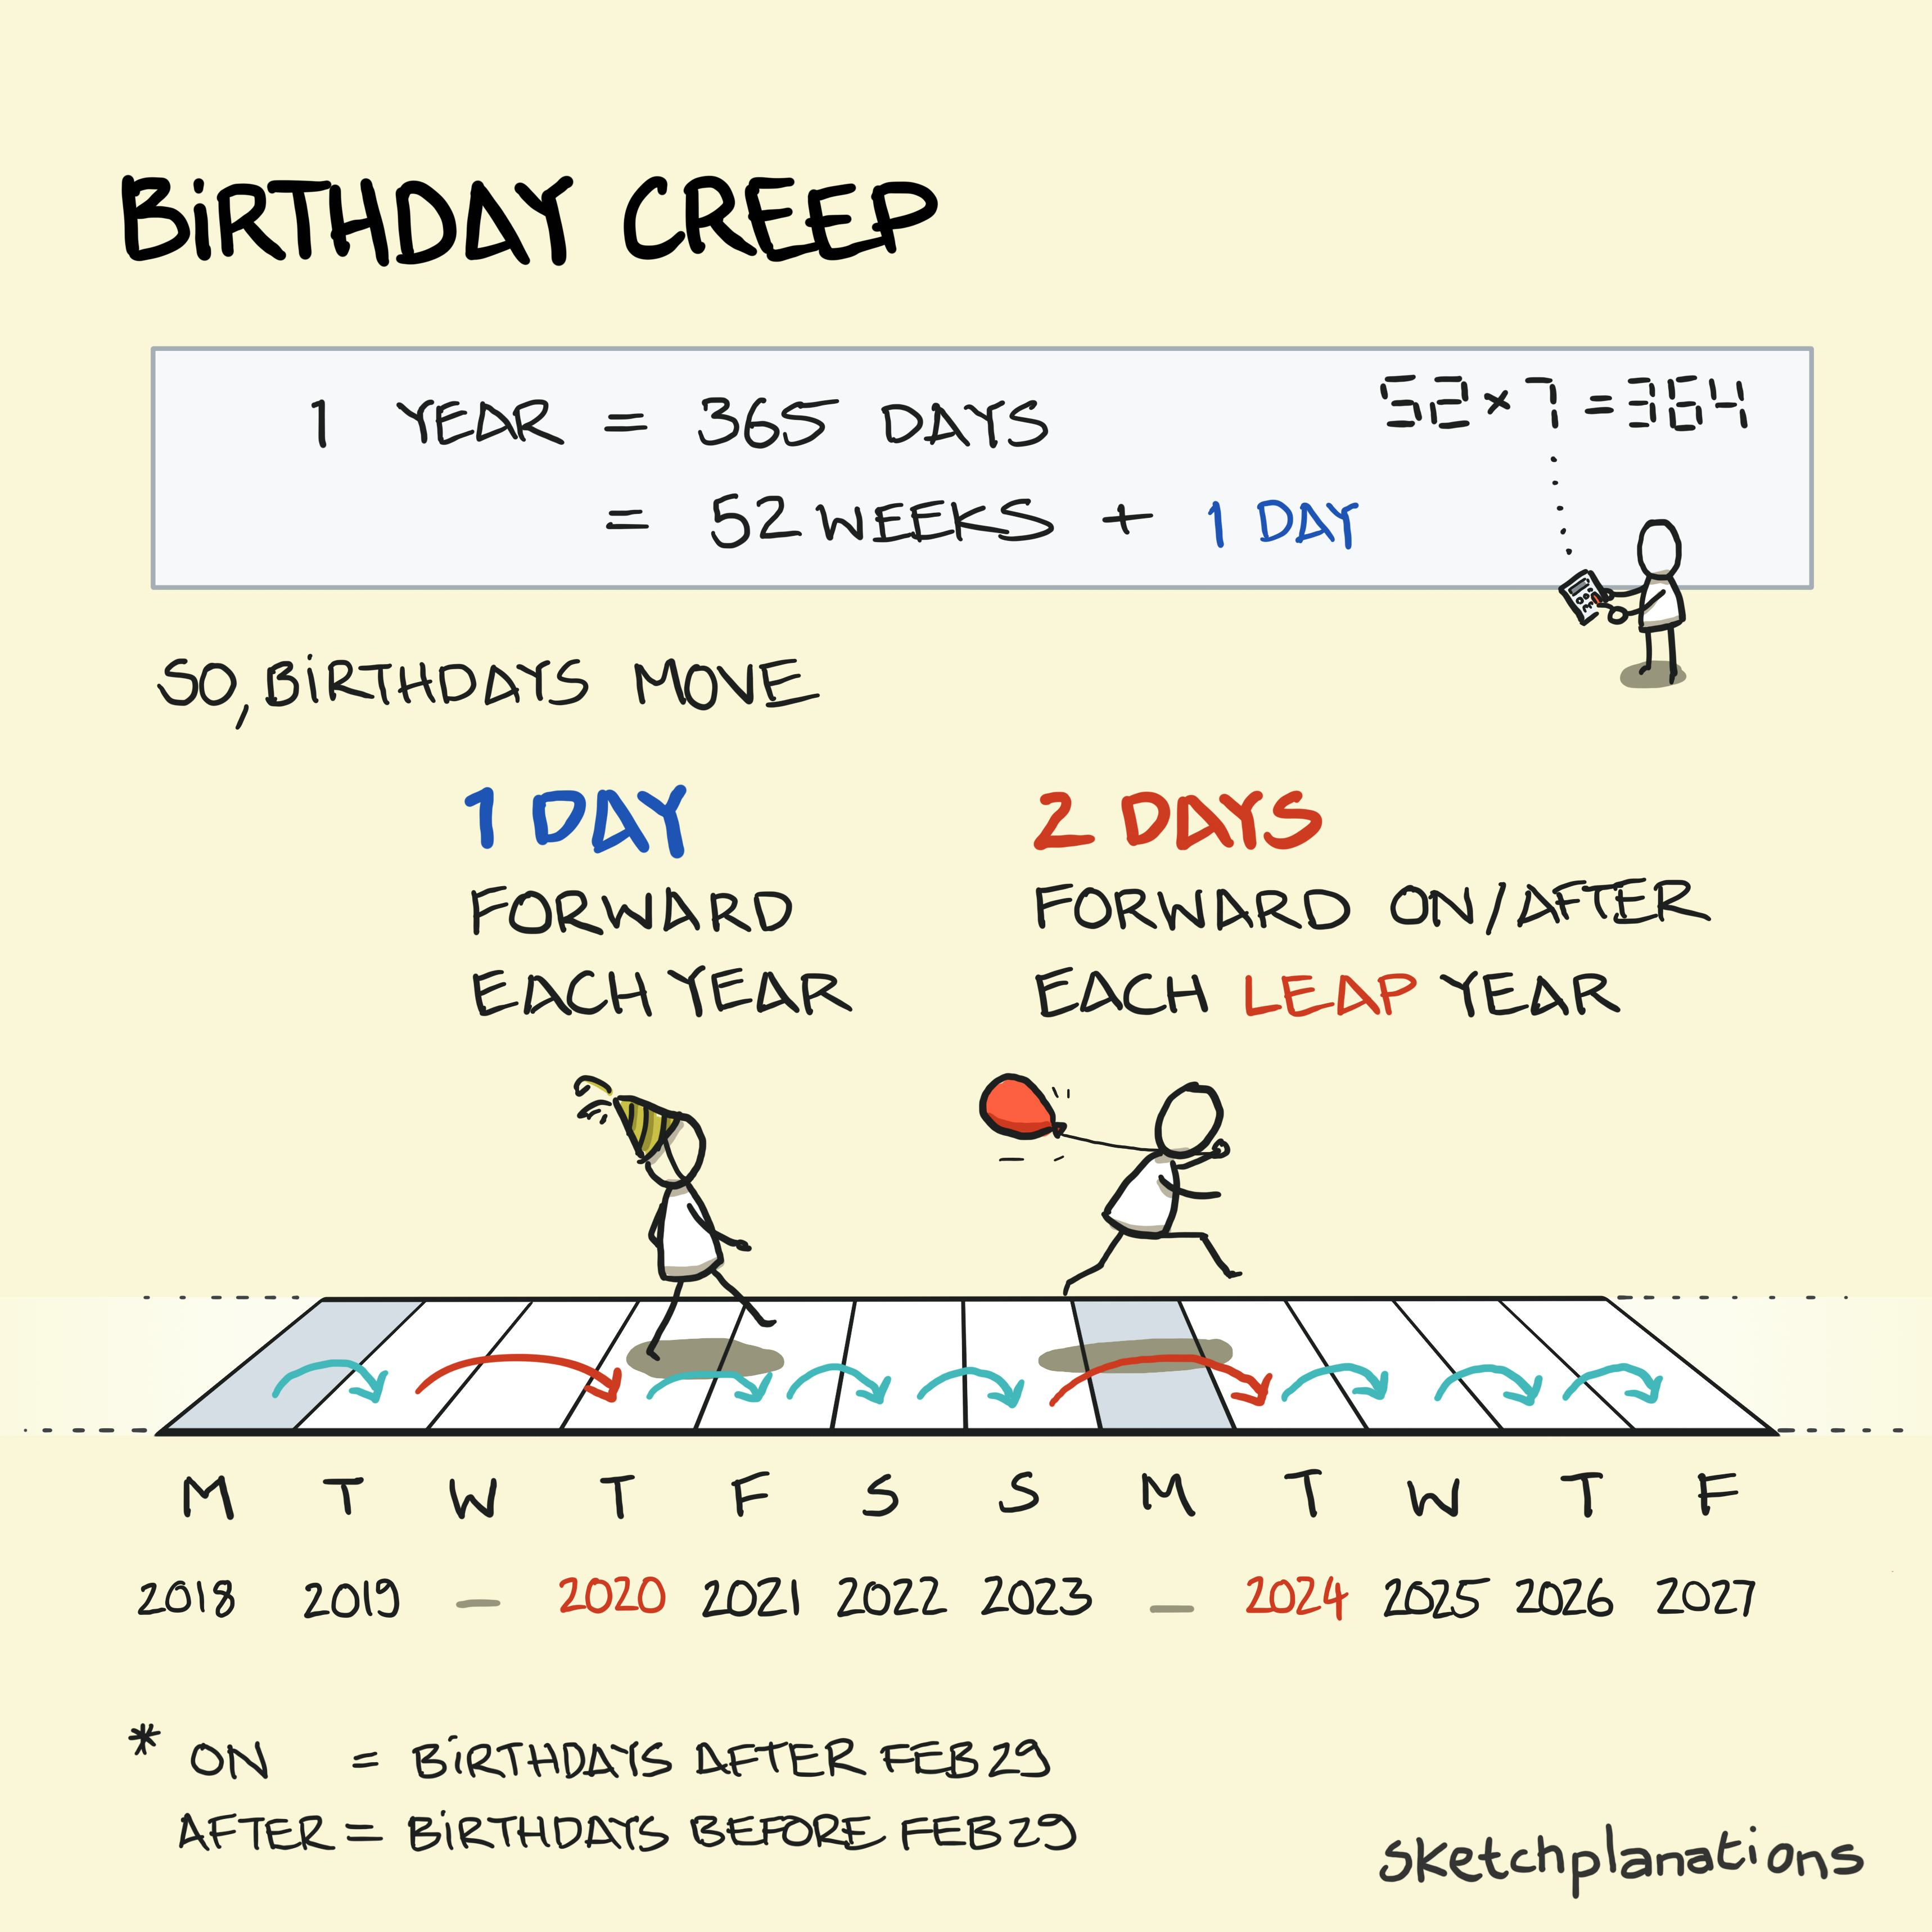 Birthday creep illustration: how does your birthday move each year illustrated by some people jumping a weekday timeline—1 day each year, 2 days around leap years